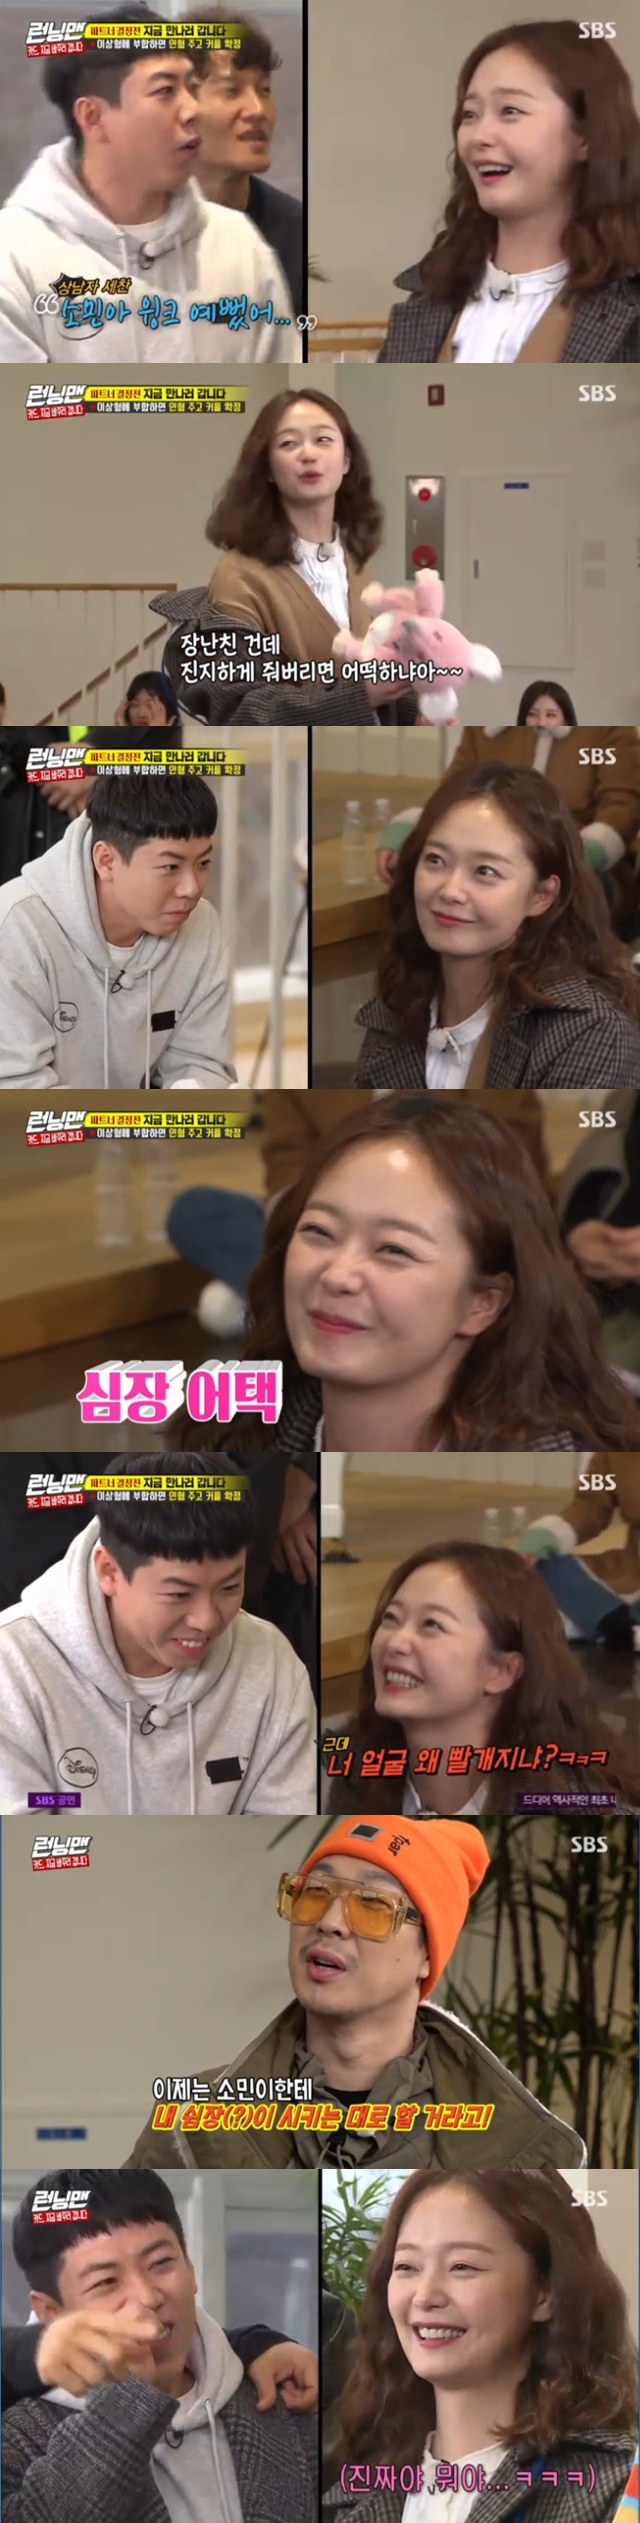 Viewers doubts about the love line of Yang Se-chan Jeon So-min, who has become an official couple of Running Man, are growing day by day.On SBS Running Man broadcast on January 19, the love line of Yang Se-chan Jeon So-min was drawn.At the opening ceremony, the members mentioned the scene where Jeon So-min stole tears after Yang Se-chan won the Excellence Prize at the end of last year at the SBS Entertainment Grand Prix.In particular, Haha said, Sechan was a little drunk at the dinner party, and he said, Now I will do what my heart tells Somin to do. Sure enough, Yang Se-chan is genuine toward Jeon So-min in the partner decision-making Im Going to Meet Now where the couple is confirmed by giving a doll if they meet the ideal type (?) he hinted at.Jeon So-min also actively expressed his affection as a dol somin.On this day, Jeon So-min said, There is no reason to go quickly when Yoo Jae-Suk, Ji Suk-jin, Yang Se-chan, Lee Kwang-soo, Haha and Kim Jong Kook are partners.He is the guy, he said, but he ran to Yang Se-chans turn.Yang Se-chan said, Wink is good for a pretty person and likes a single-headed head. Jeon So-min headed to Yang Se-chan the fastest of female performers.Yang Se-chan looked back and confirmed that there was a Jeon So-min, who melted Yang Se-chans mind with a wink.Yang Se-chan showed a full-bodied smile while pretending not to be but being disarmed by a wink from Jeon So-min.The members who watched this encouraged Yang Se-chan, saying, You have a heart, and Yang Se-chan said, I will look more.However, Yang Se-chan, who saw the lovely wink of Jeon So-min again, gave a doll to Jeon So-min, saying, My heart does what I say. So the two became a couple again.The response from Jeon So-min was a reversal.I am disappointed in the reaction of Yang Se-chan, saying, This is not funny. Jeon So-min said, What if I give it seriously? However, Jeon So-min laughed because he could not hide his heartbeat appearance on Yang Se-chans Confessions (?).bak-beauty